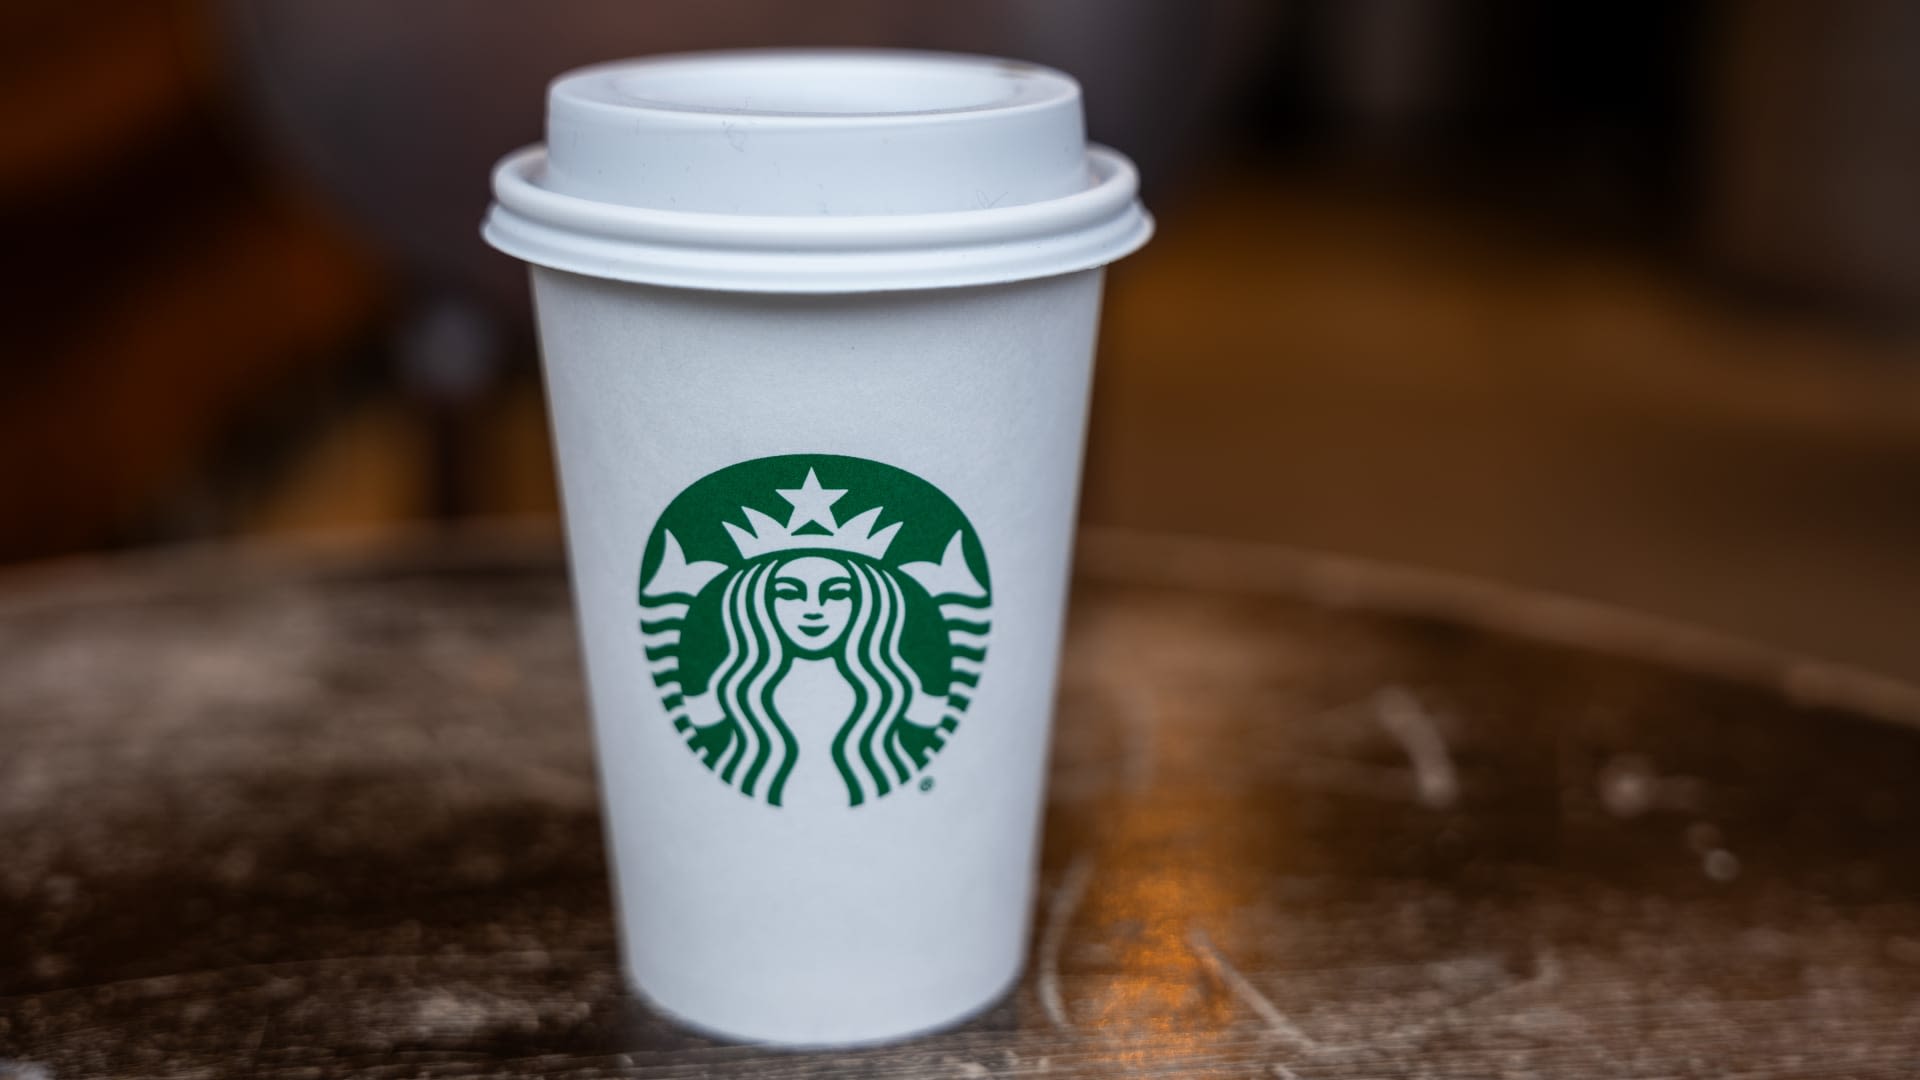 Starbucks gets a price target cut after a brutal quarterly miss and light guidance